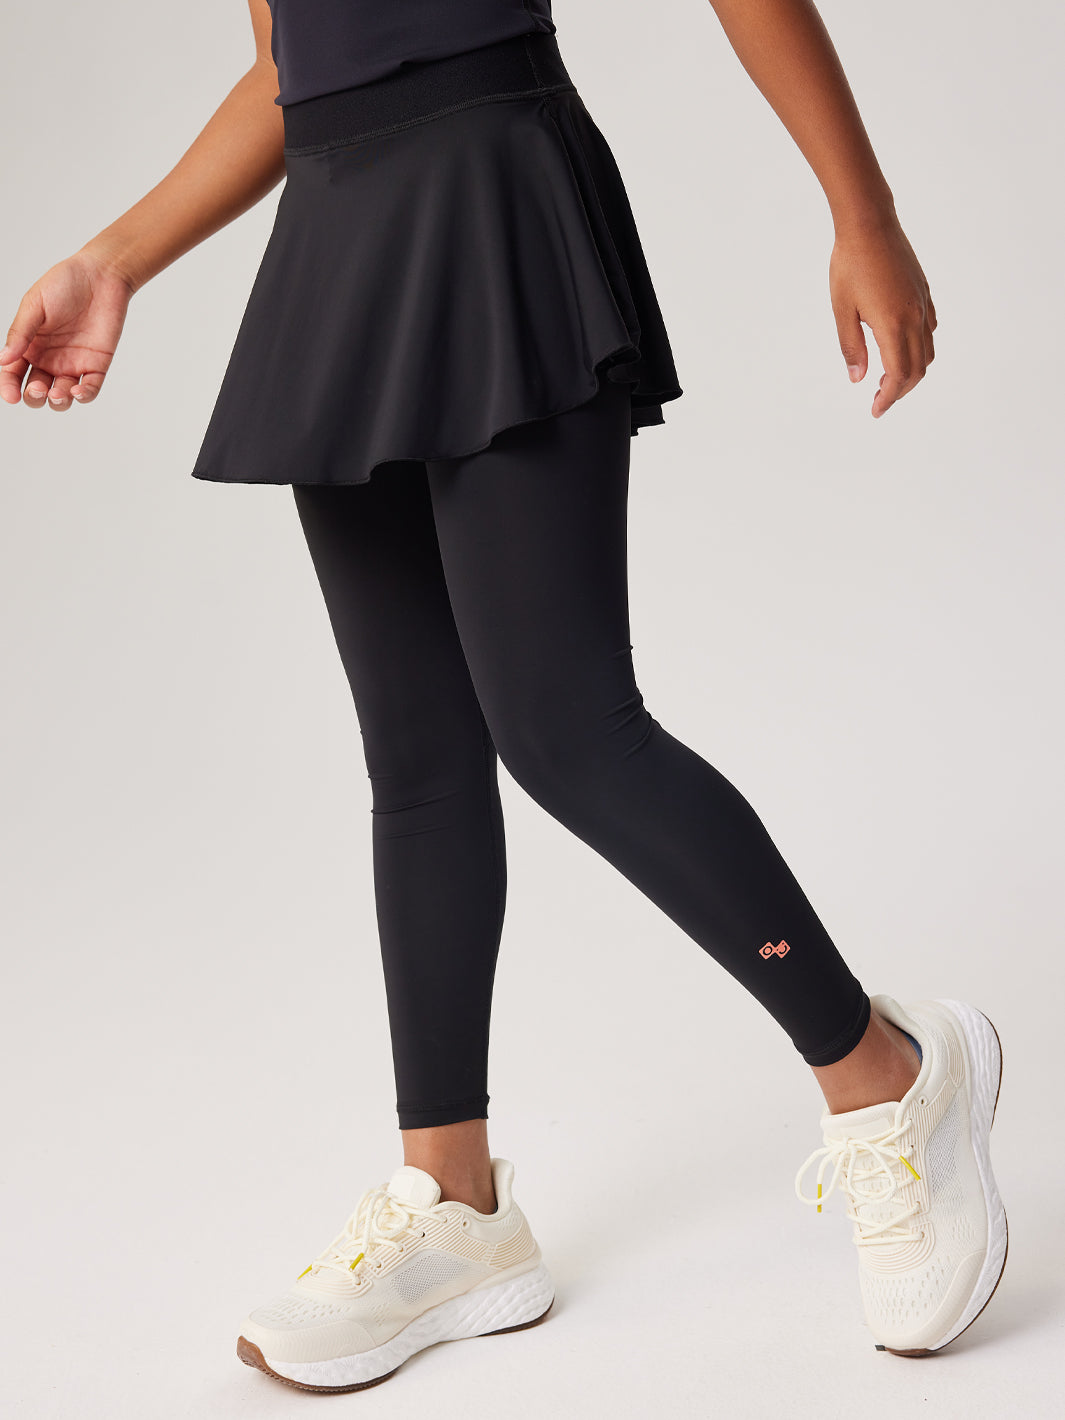 2 in 1 Knee Length Sport Skirt with Attached Leggings